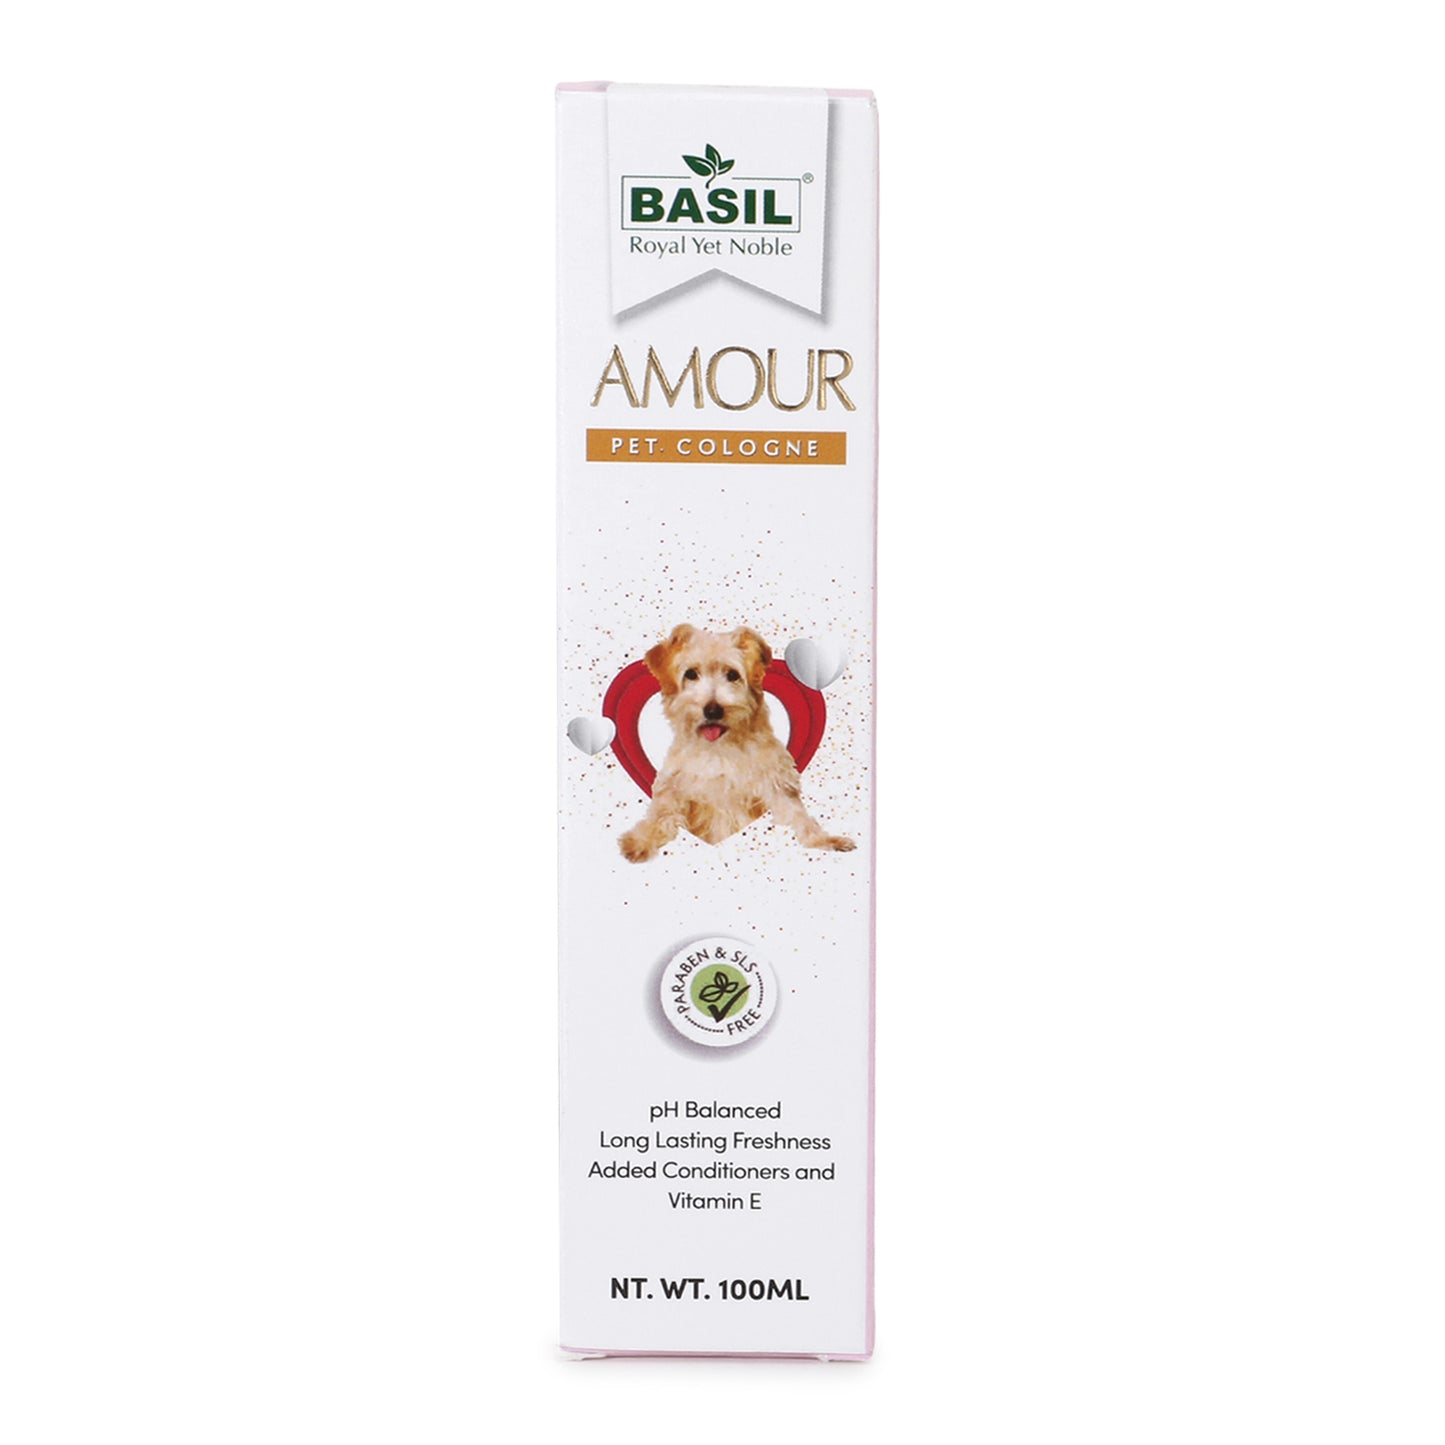 BASIL AMOUR Cologne for Dogs, 100ml